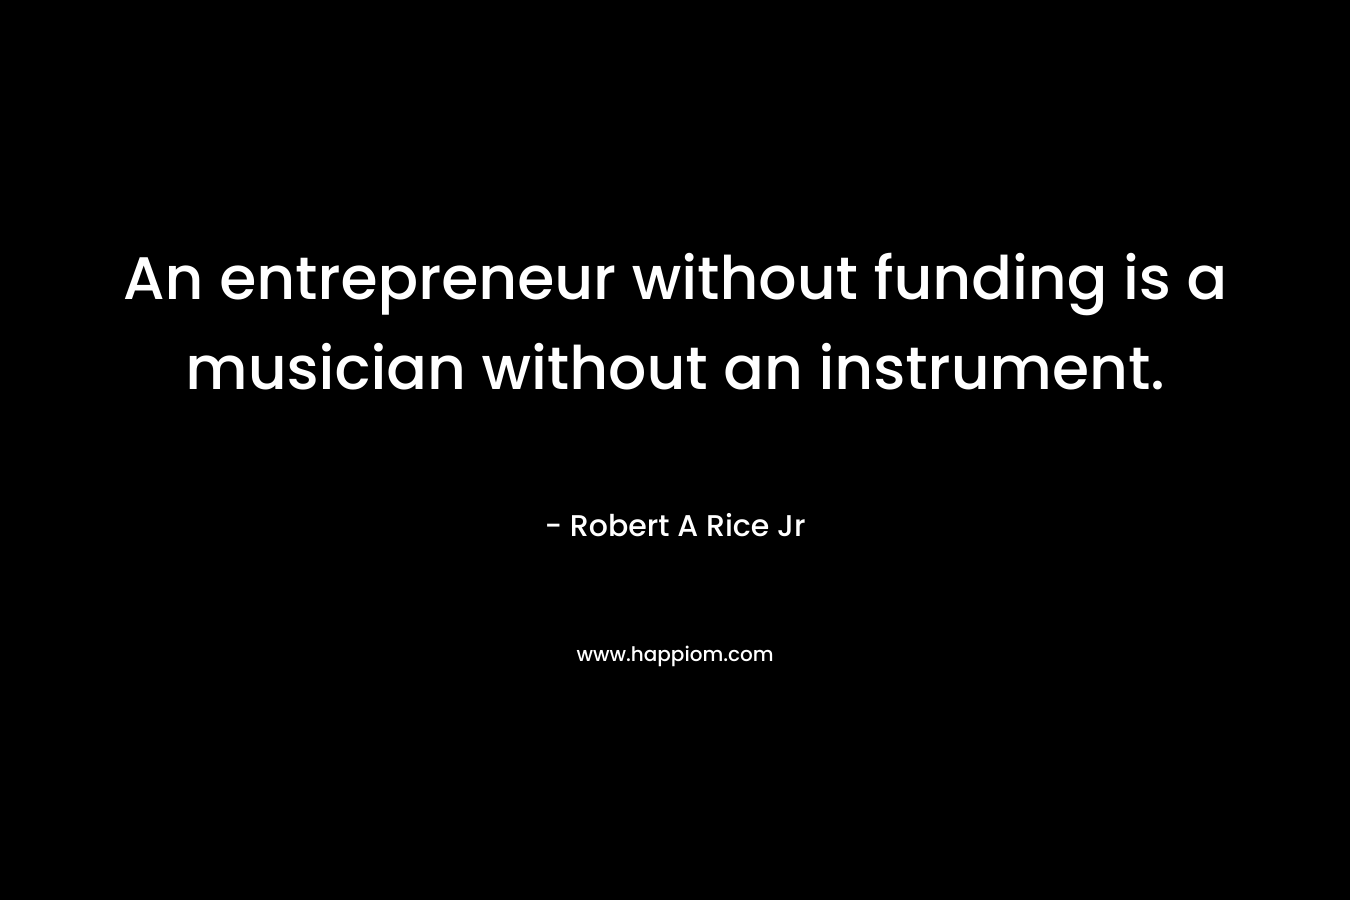 An entrepreneur without funding is a musician without an instrument.